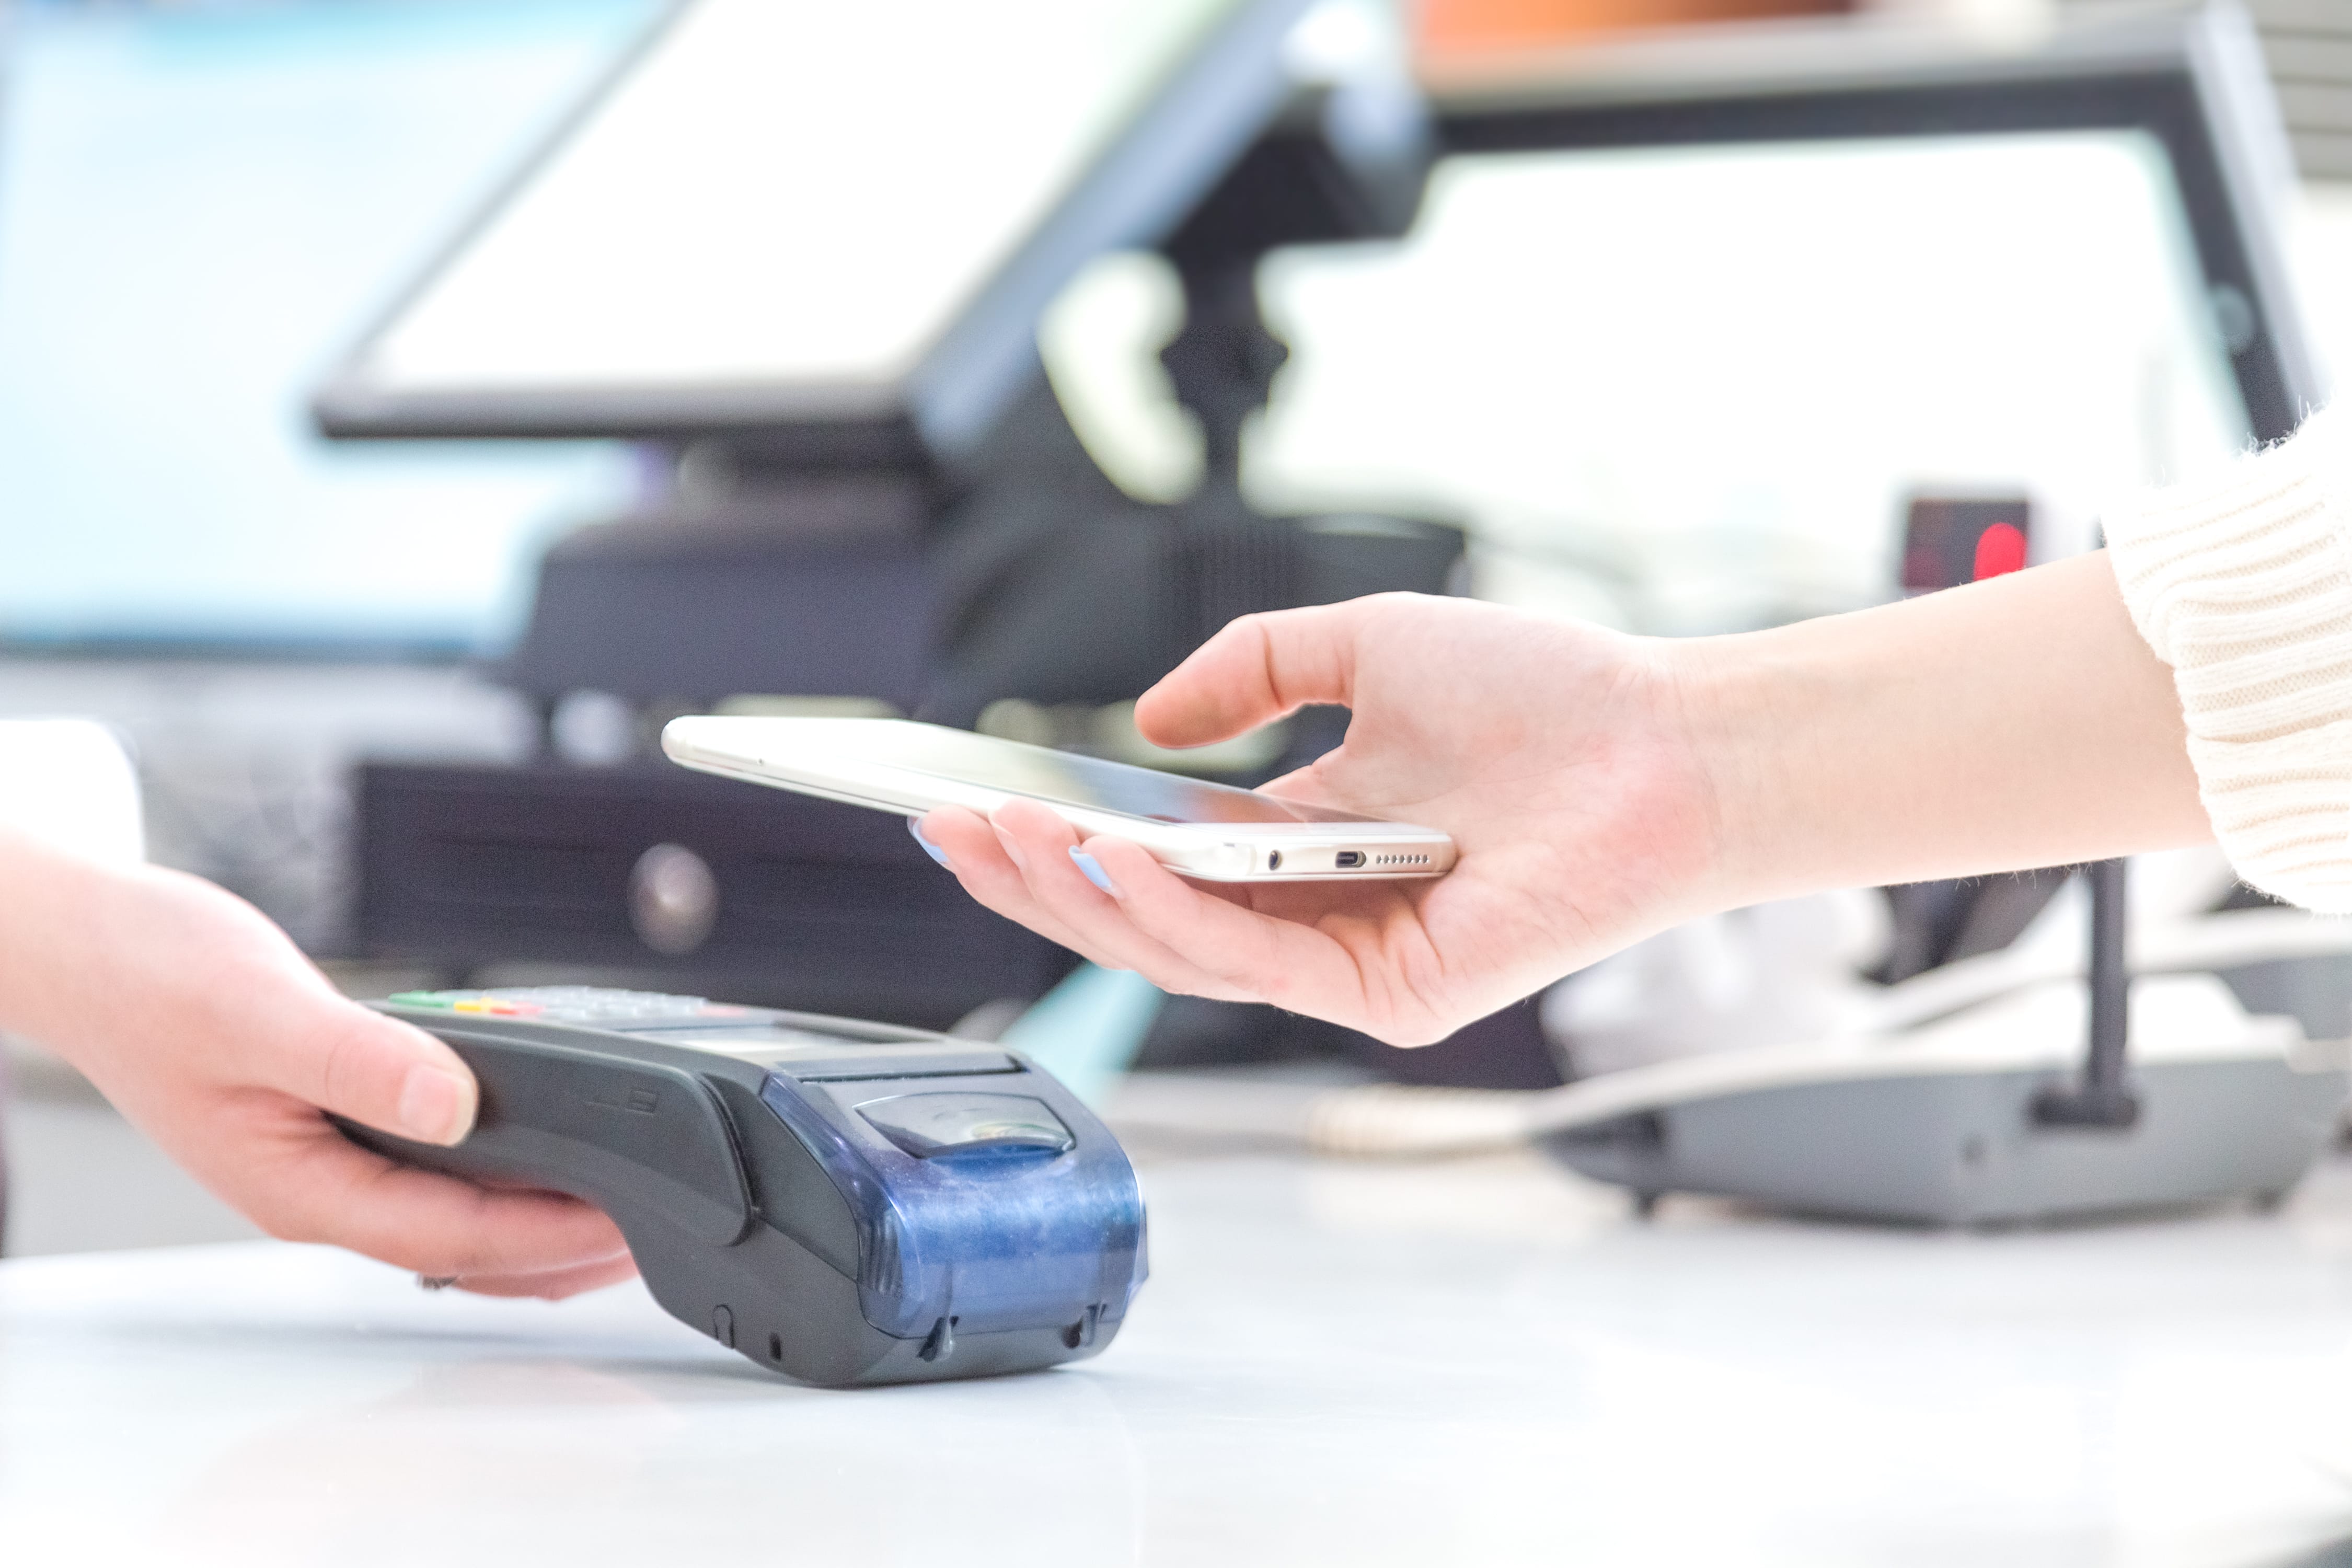 A hand holding a phone over a payments terminal